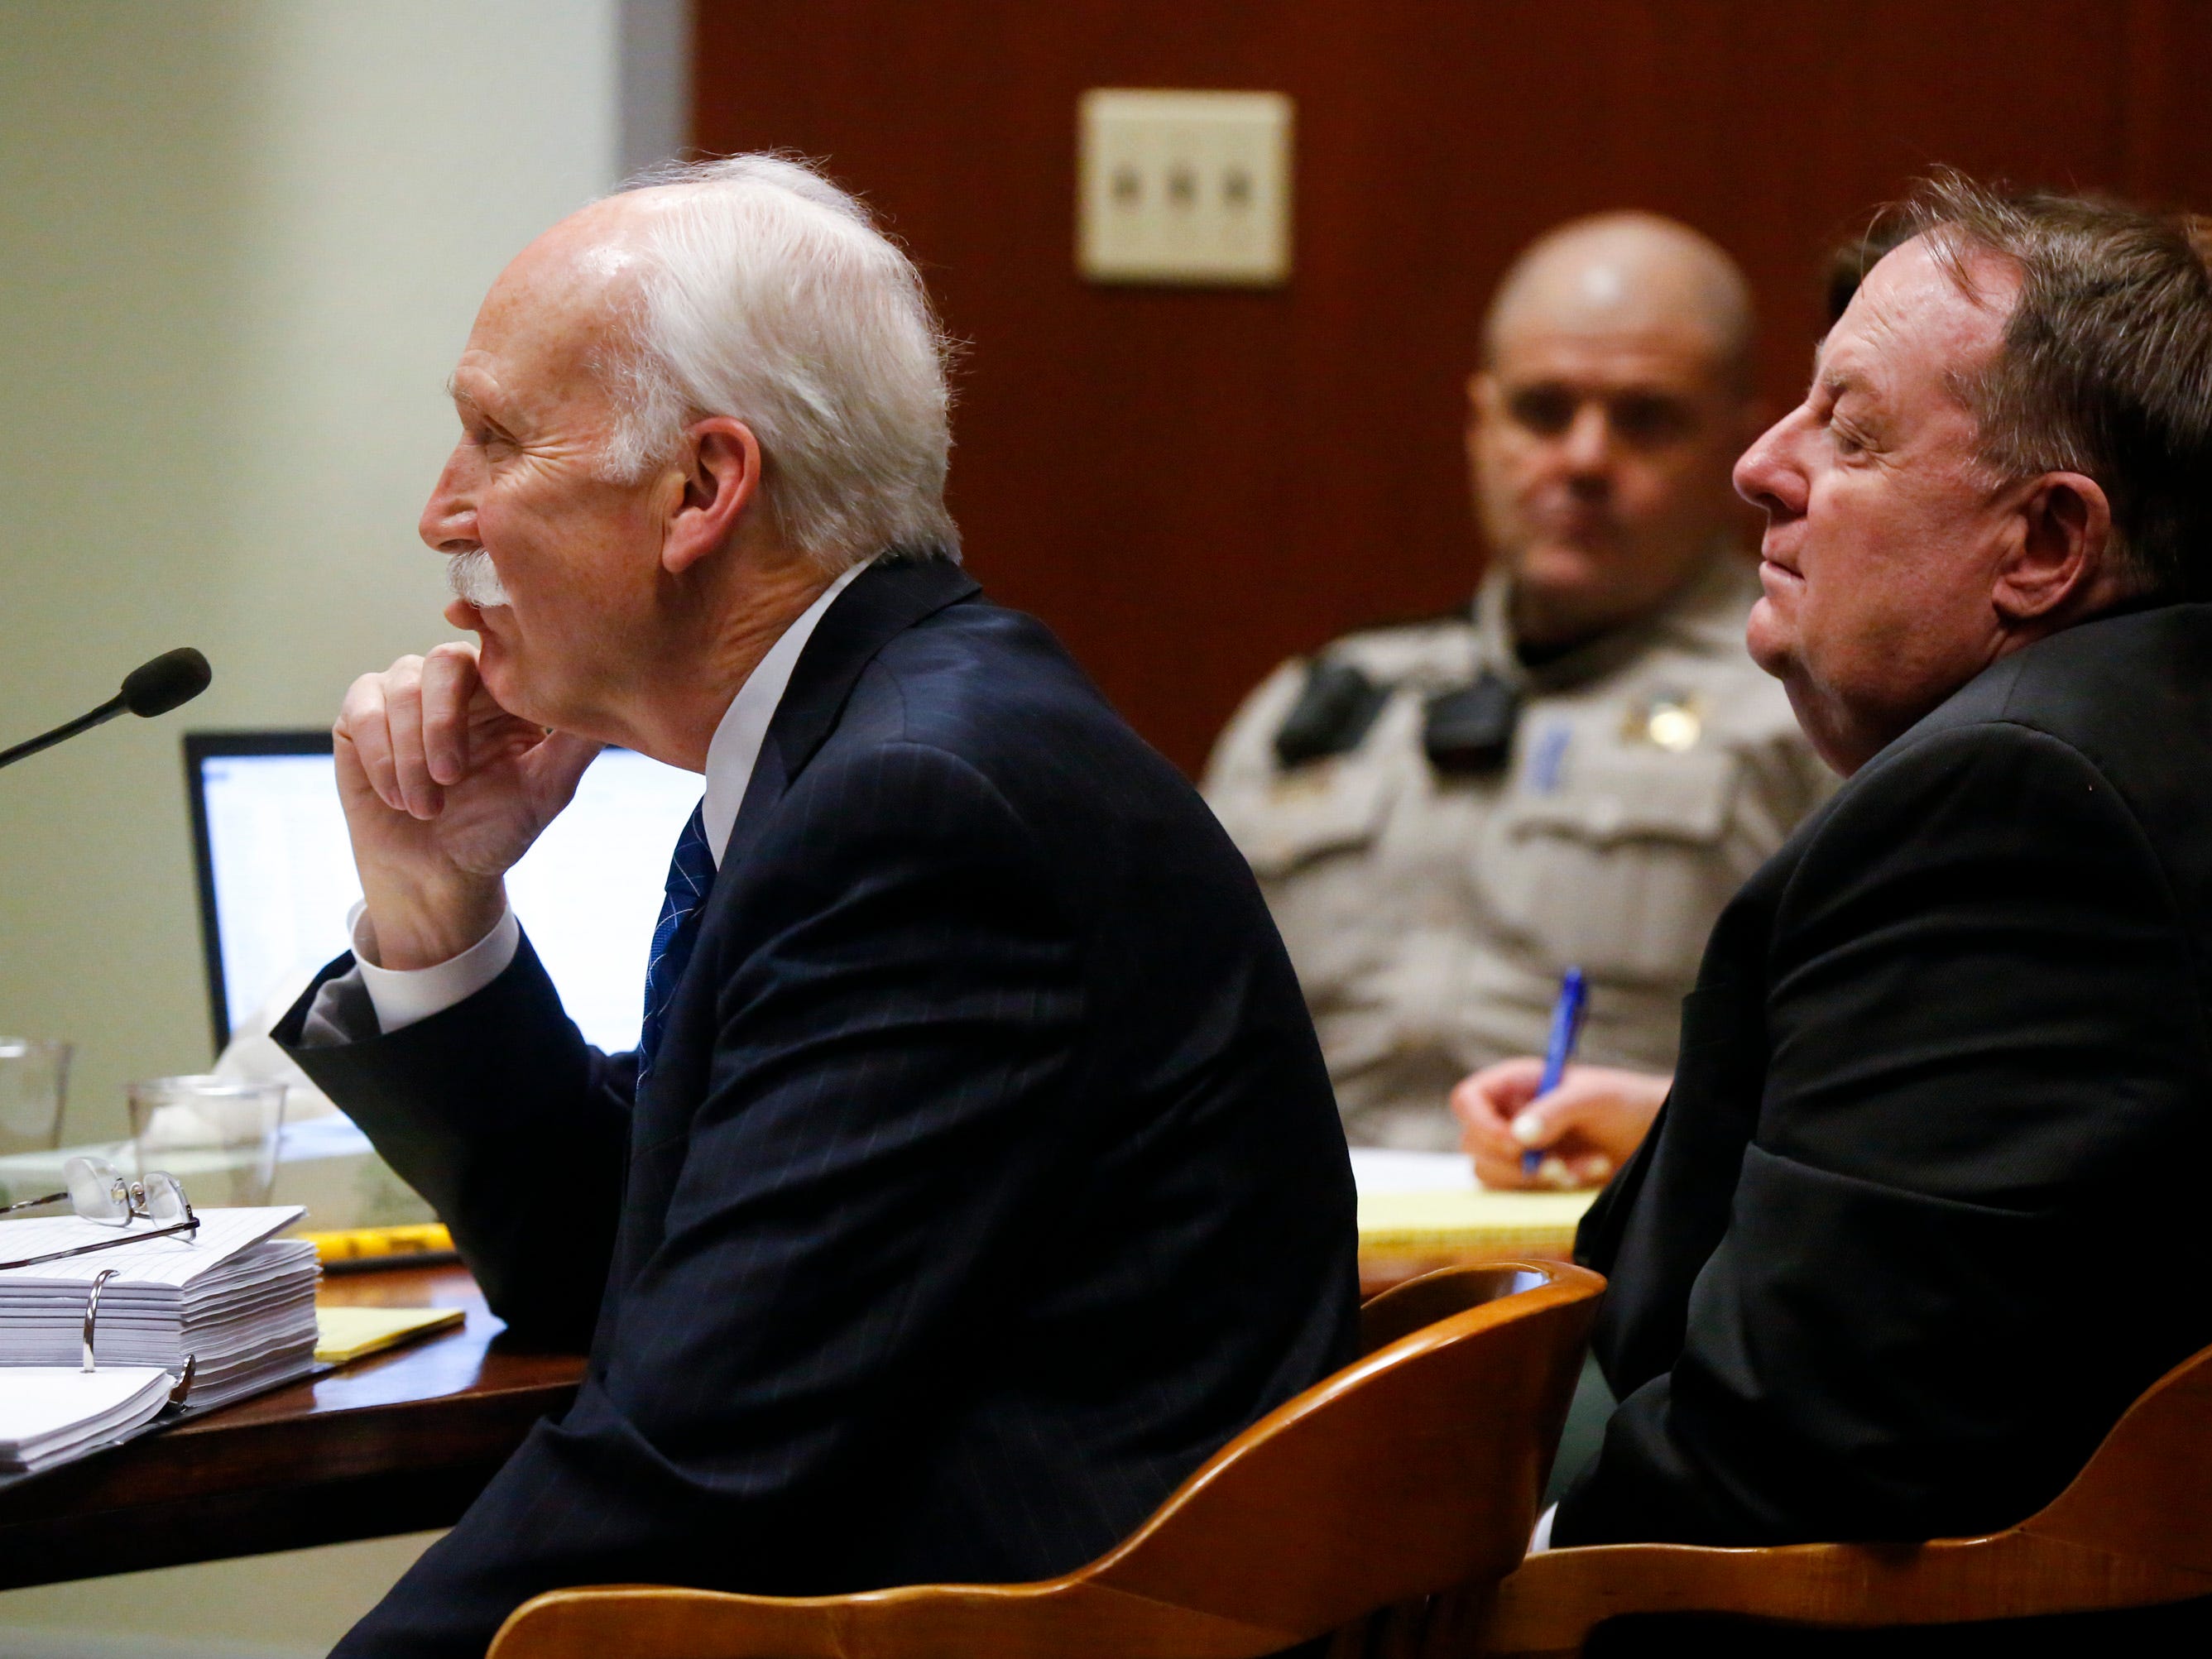 Defense attorney Leon Spies (left) questions a witness while seated alongside defendant Jerry Burns during his trial at the Scott County Courthouse in Davenport on Wednesday, Feb. 12, 2020.